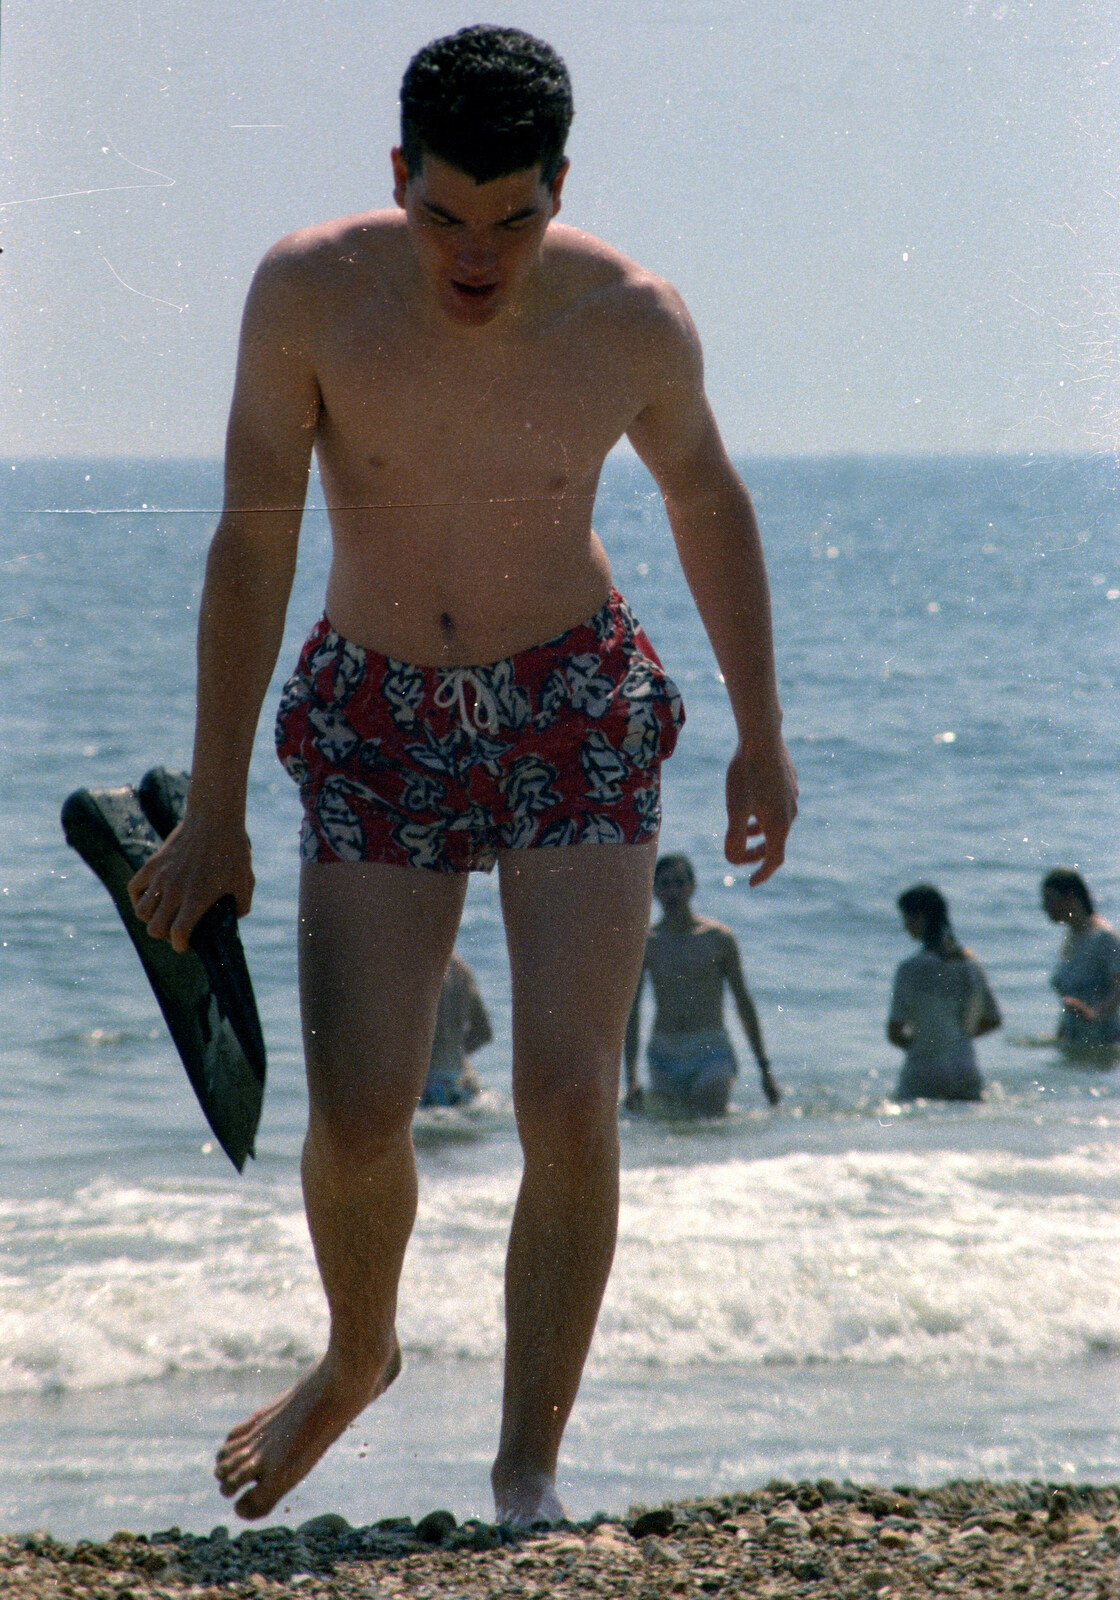 Jon walks up the beach after a bit of a swim from A Ford Cottage Miscellany, Barton on Sea, Hampshire - 7th July 1986